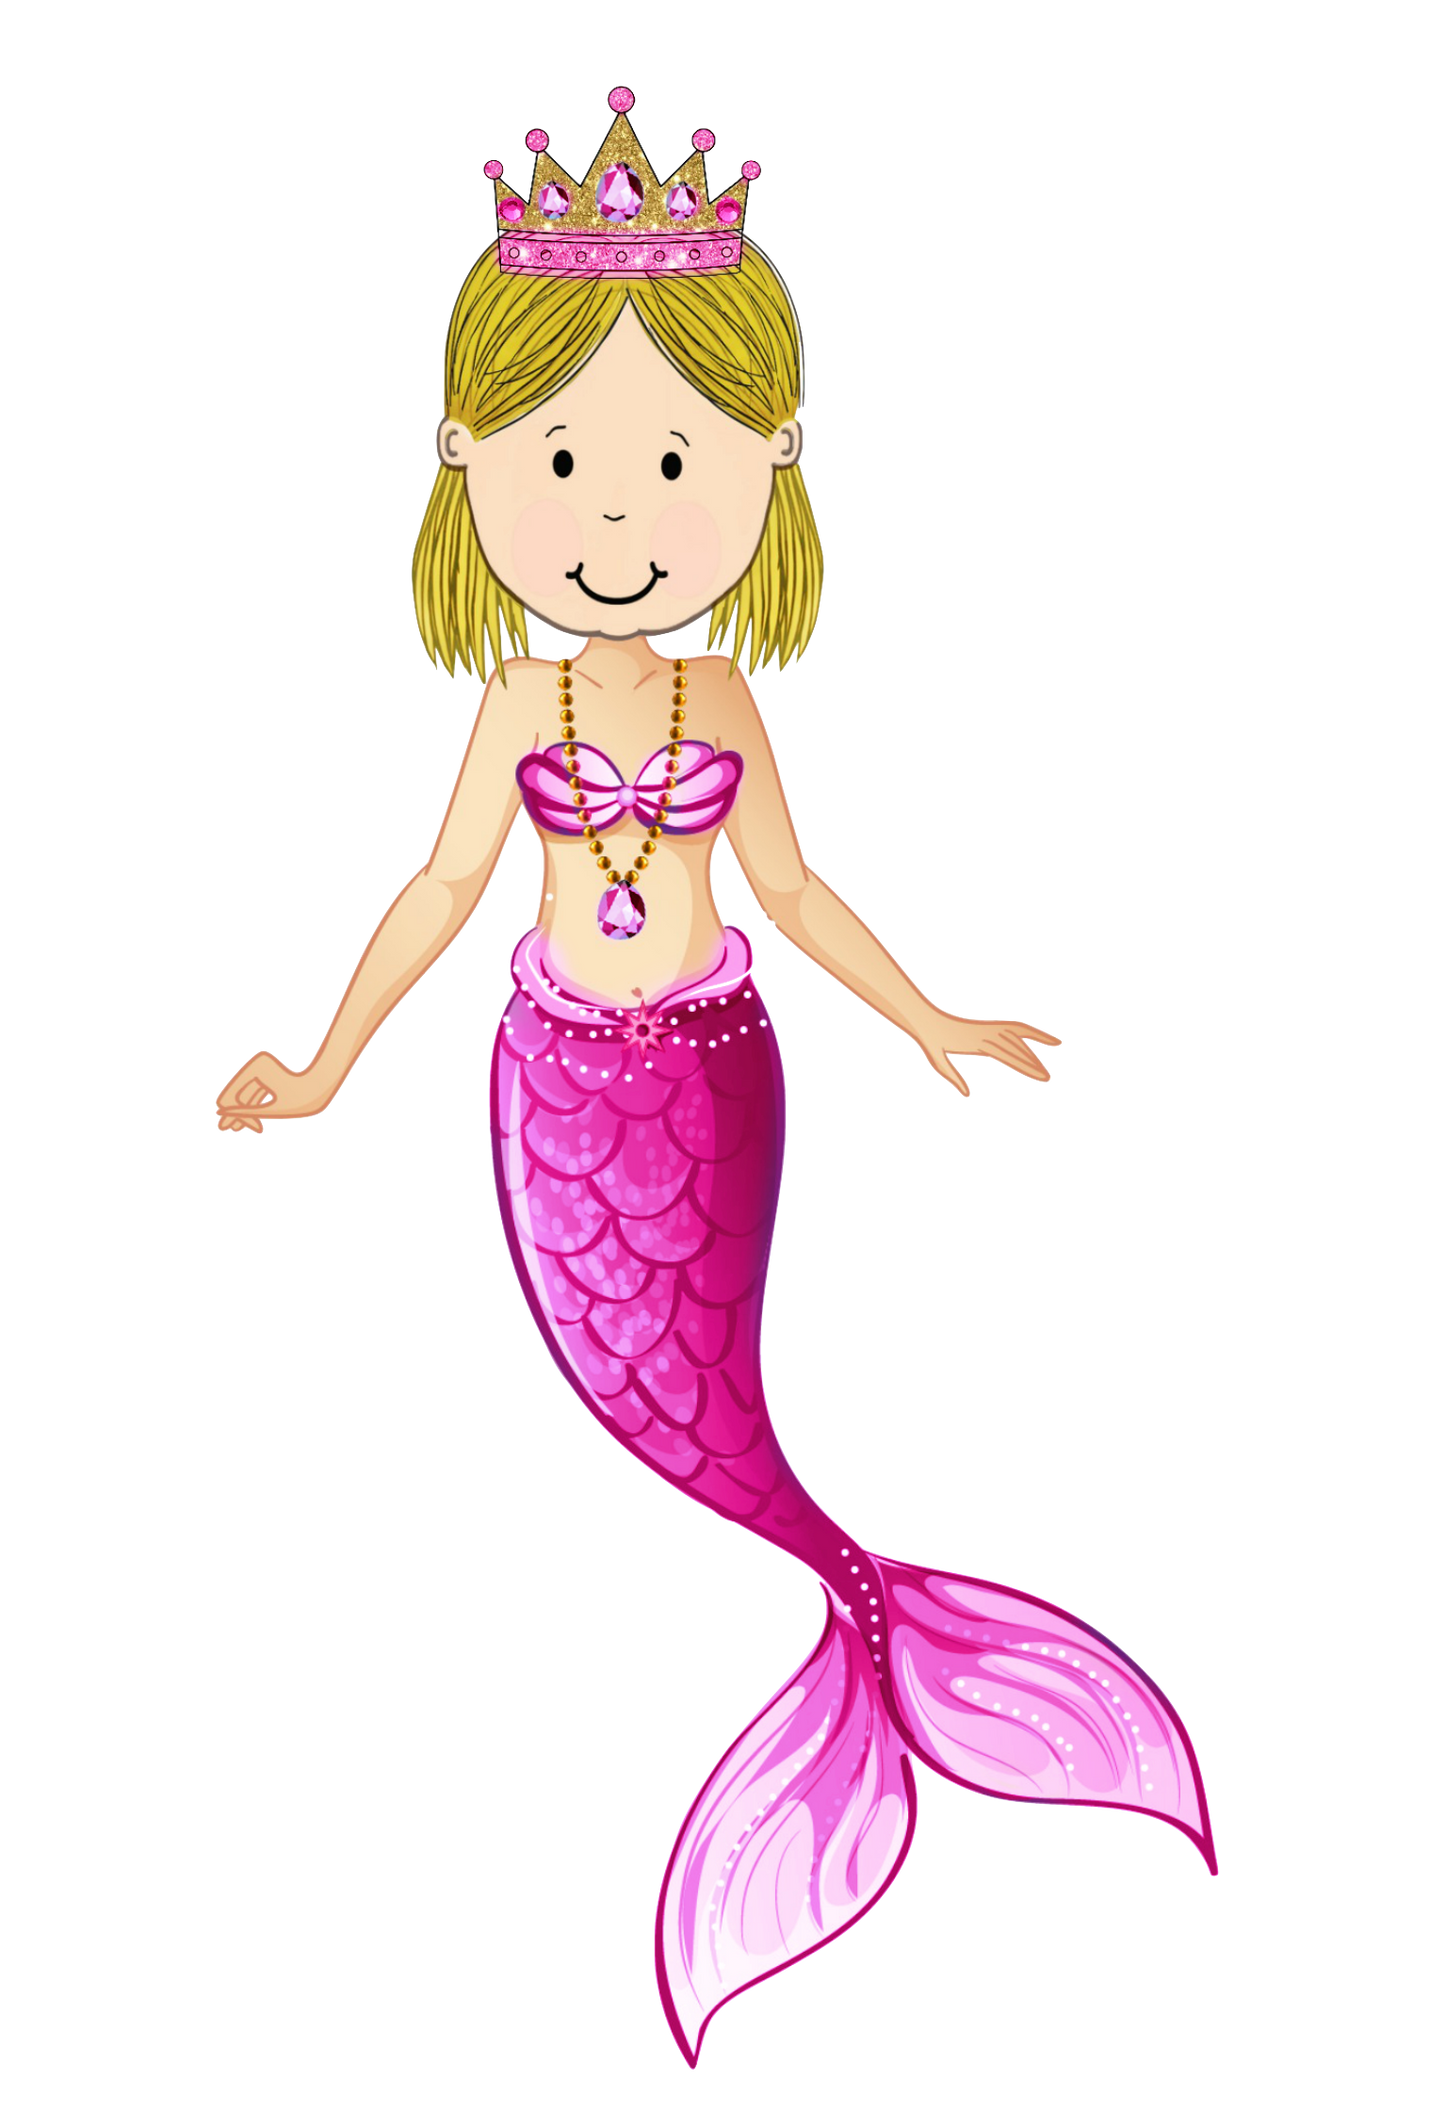 Olivia Mermaid in Pink she also comes in purple, green, turquoise and blue